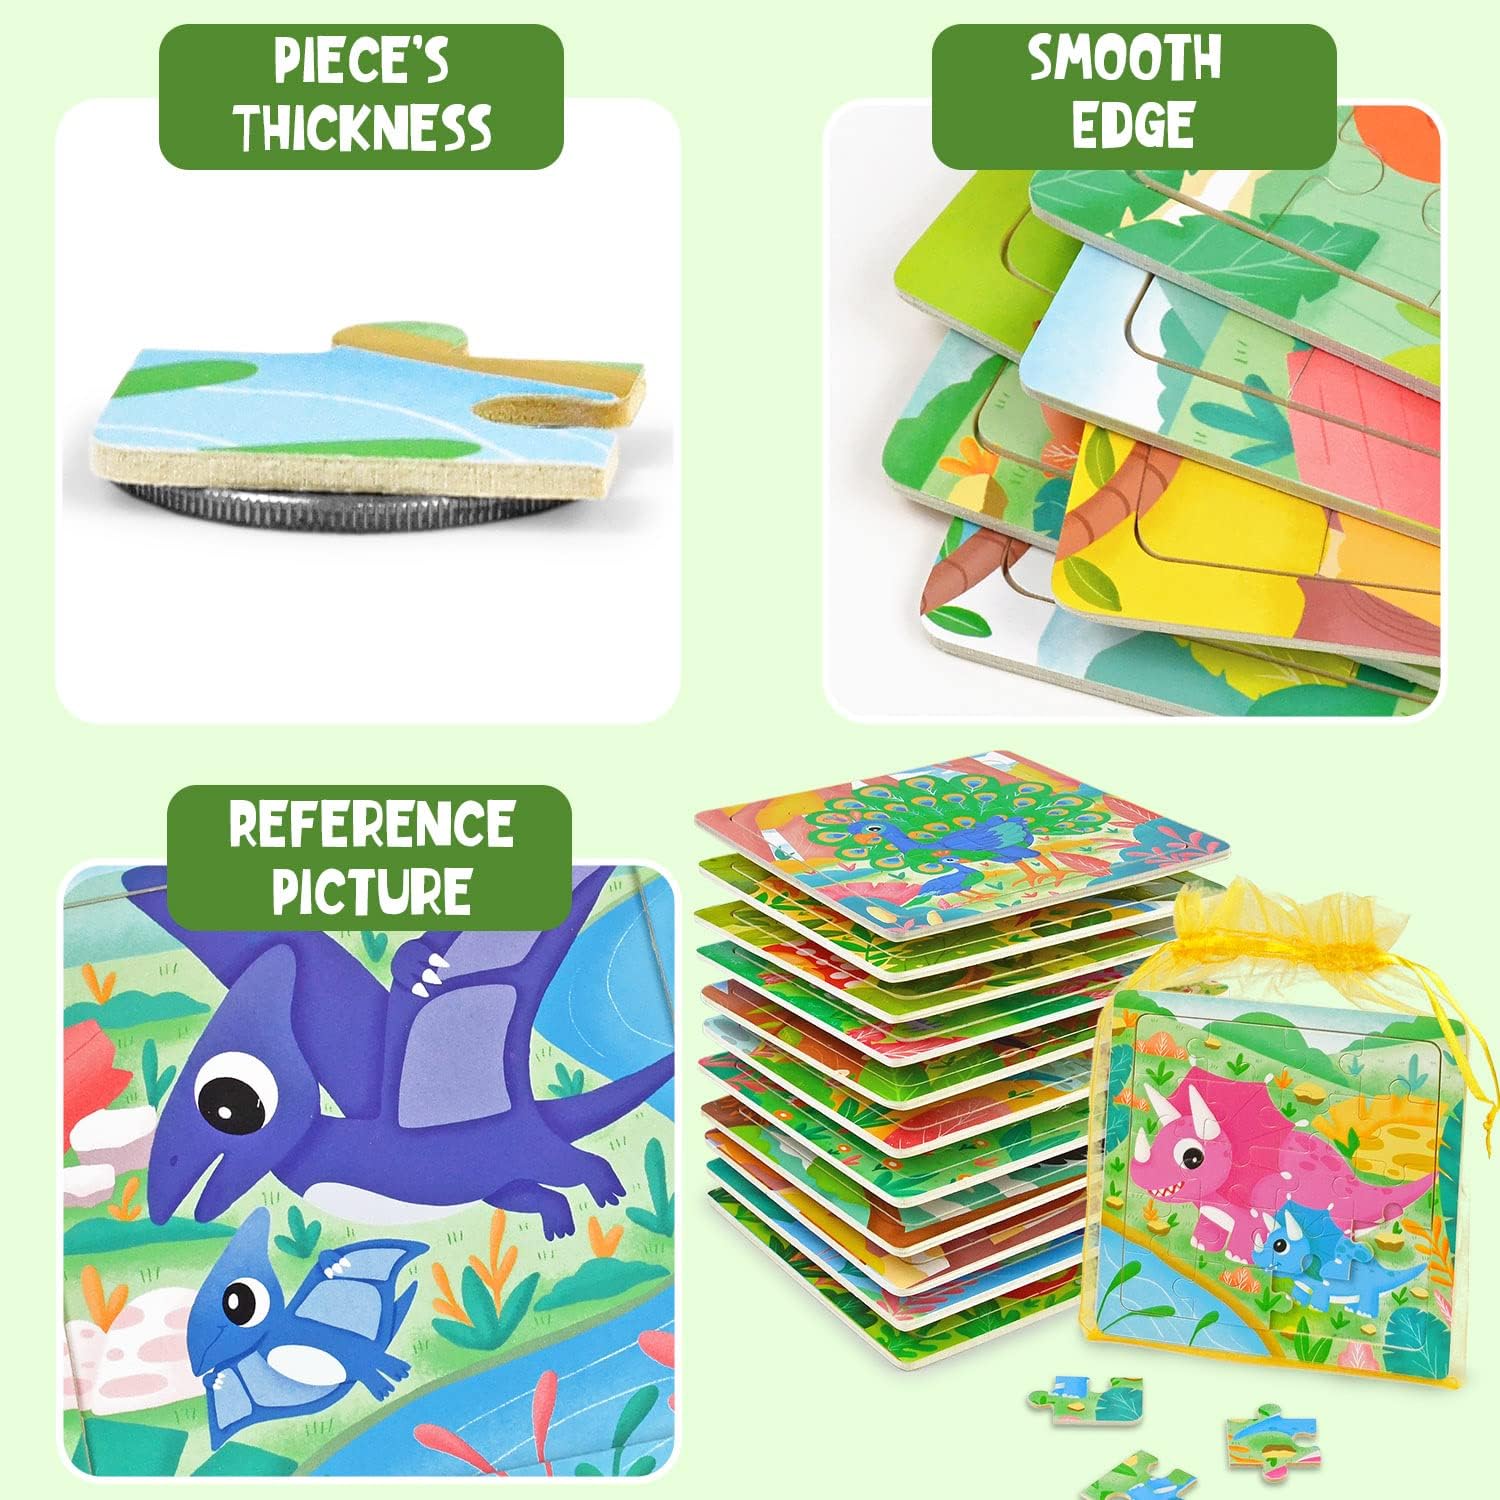 Bulk Dinosaur Puzzles for Kids Ages 4-8 Years Old, Preschool Wooden Jigsaw Puzzles for Toddlers Travel, Party Favors, and Class Prizes (Dinosaurs+Birds)